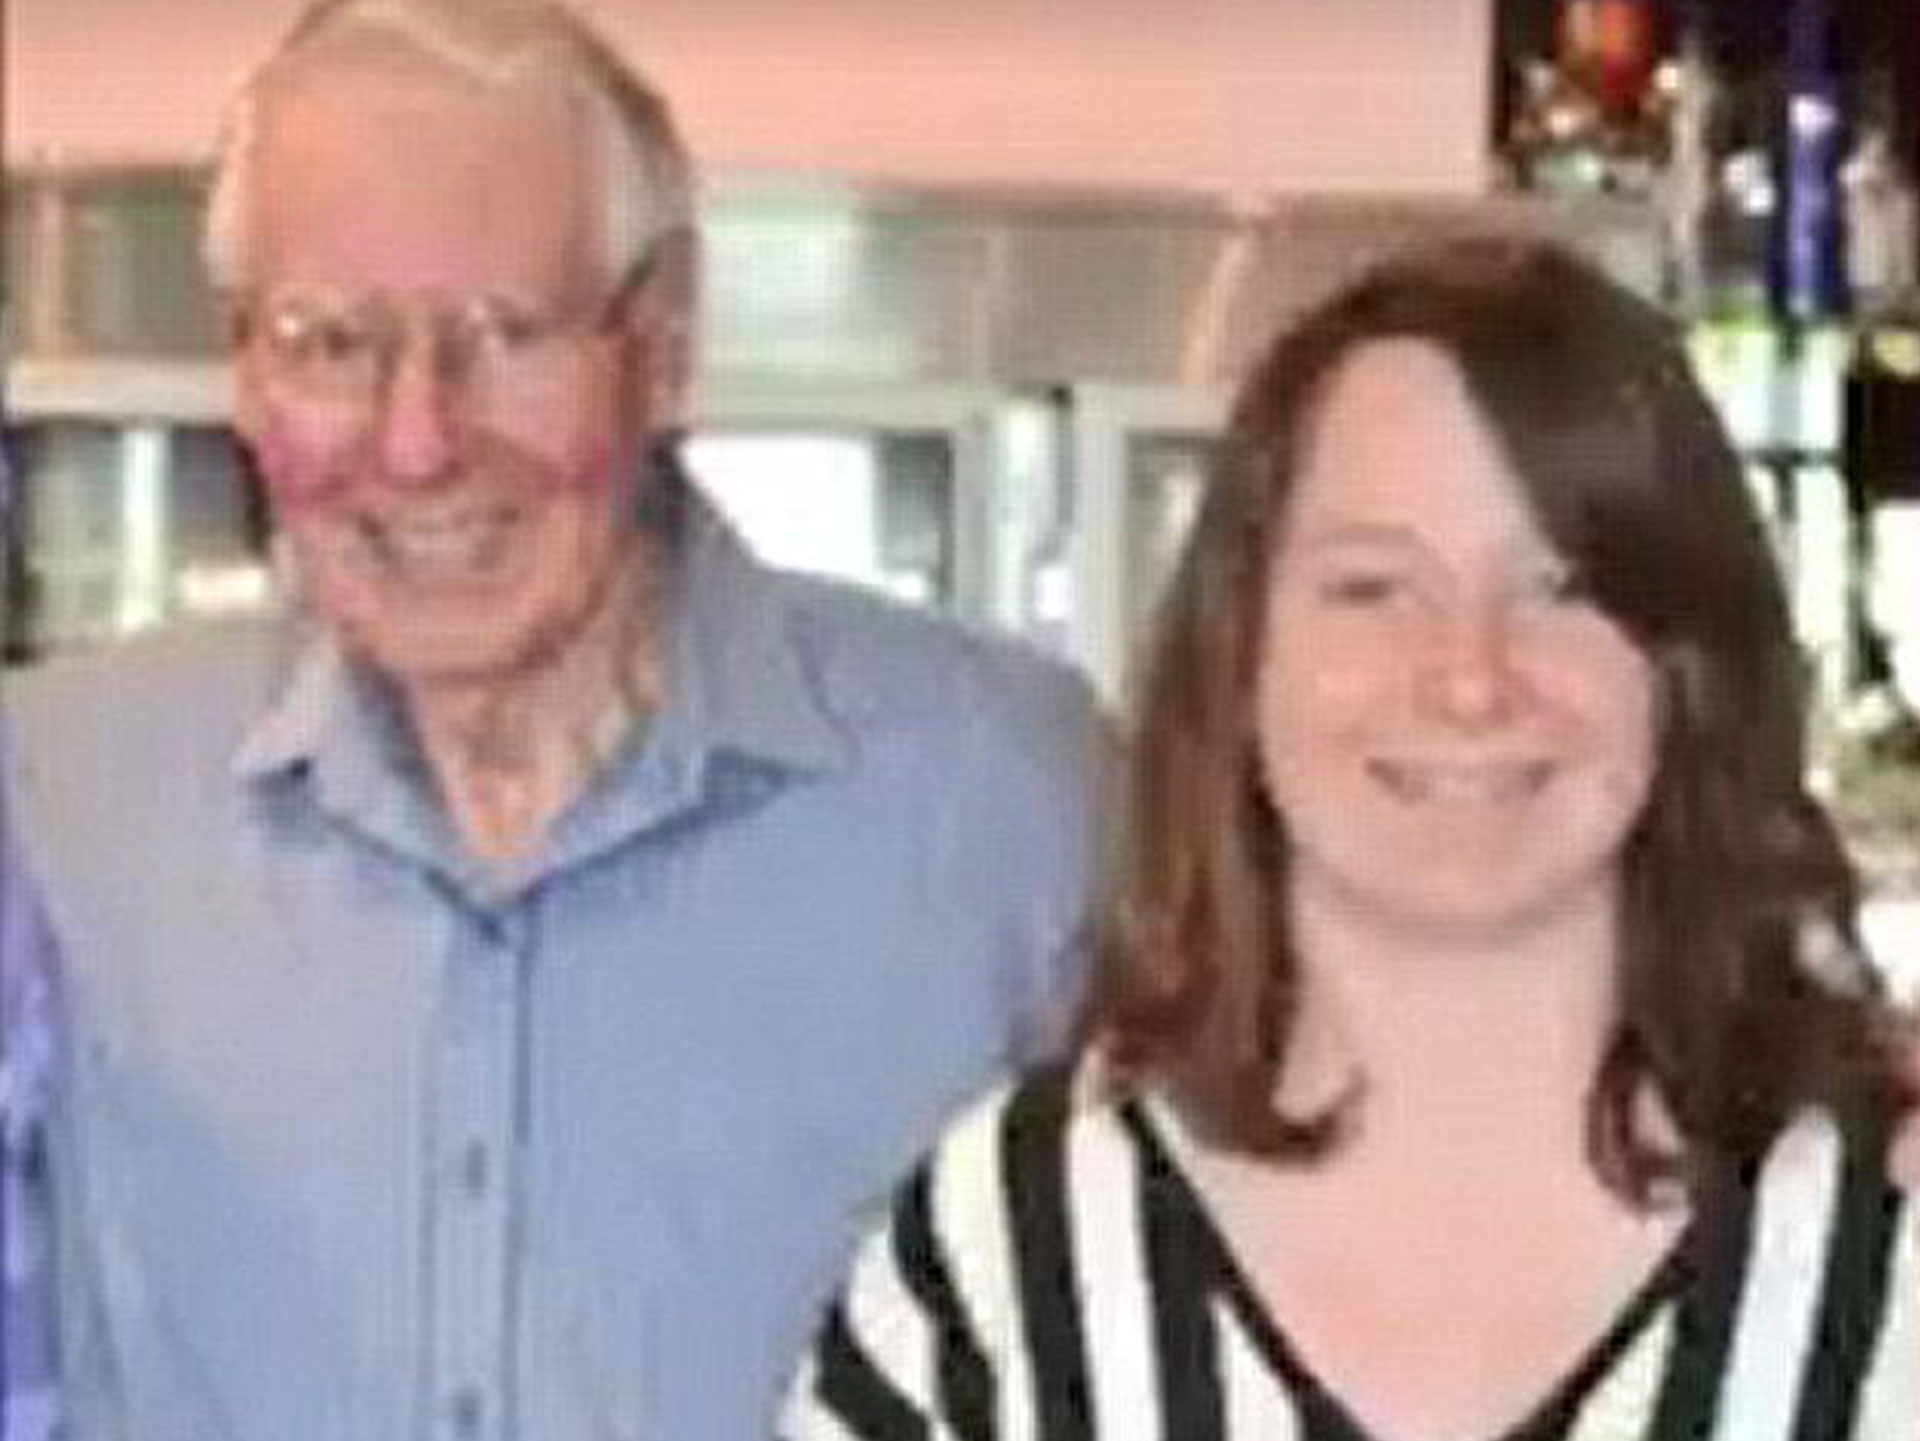 A girl wept over the death of her grandad, only for her relatives to discover she had murdered him